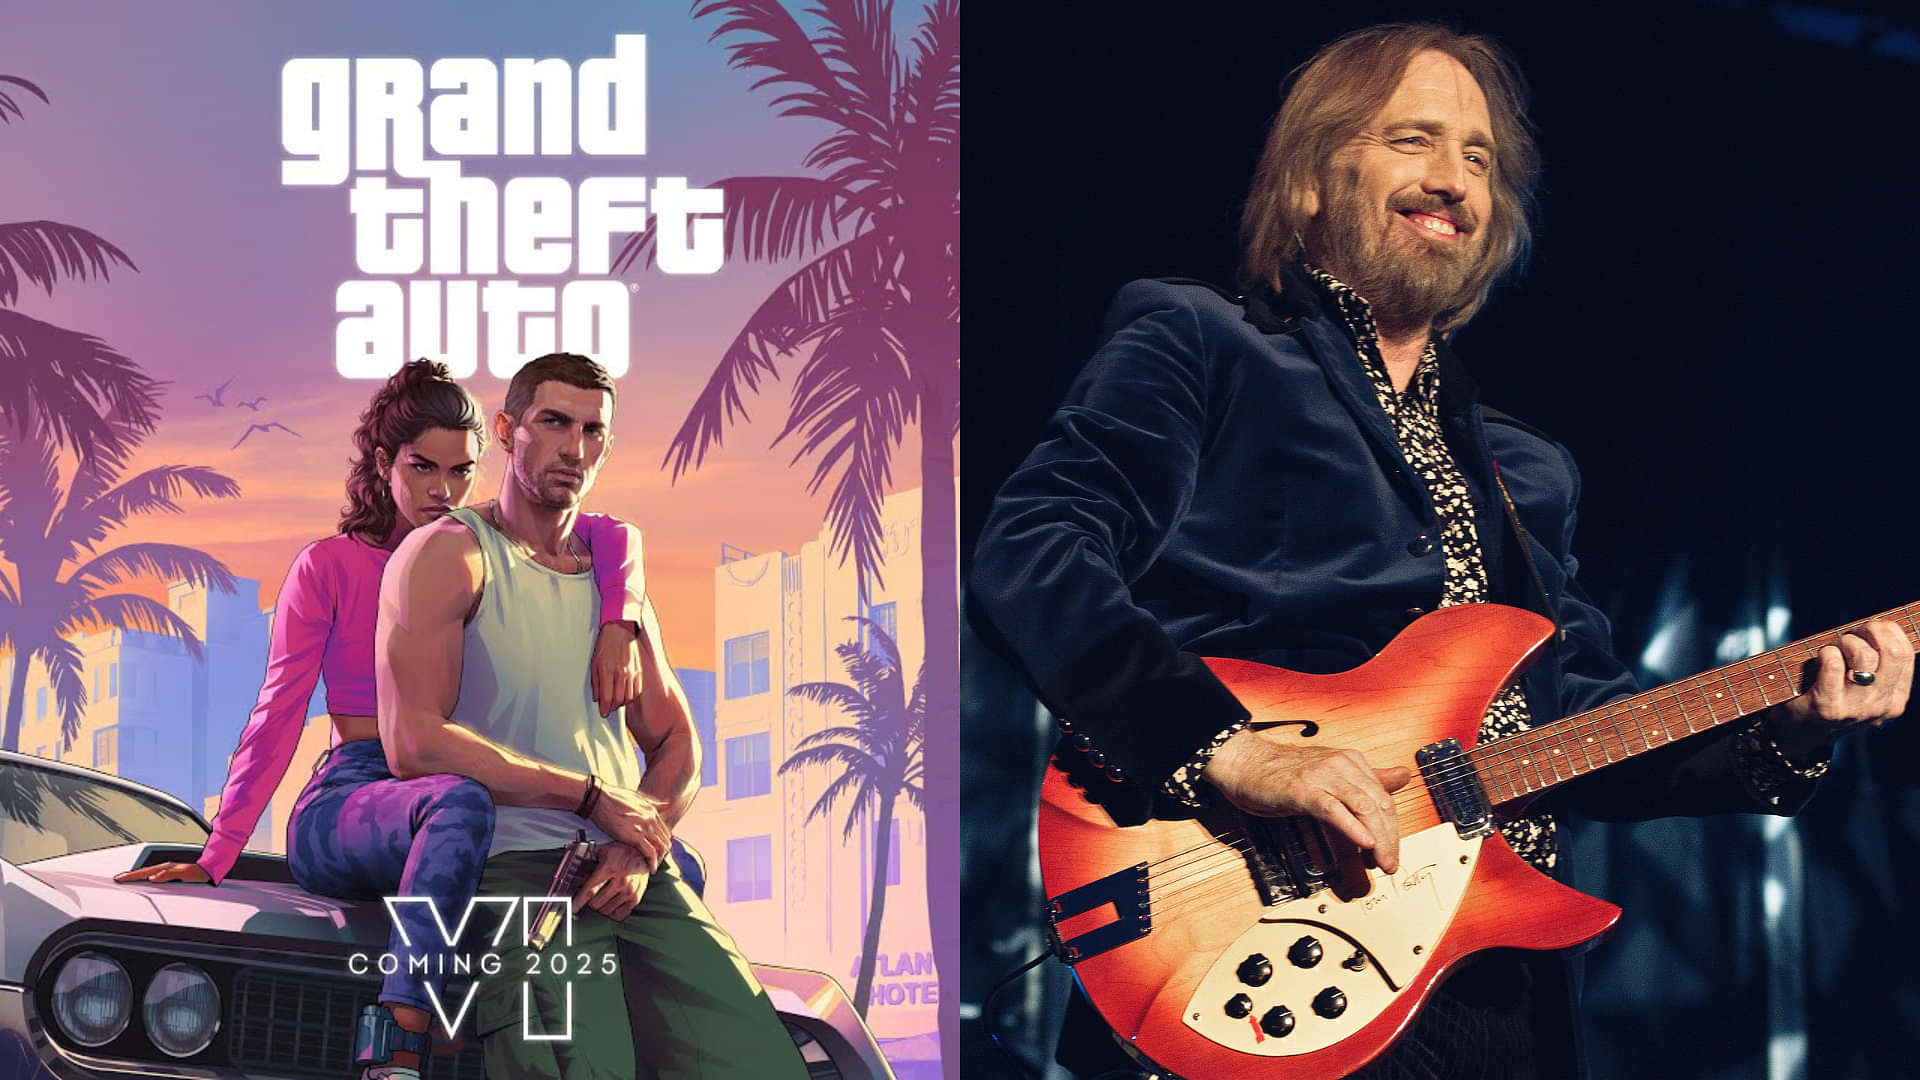 Who is Tom Petty? GTA 6 trailer causes late singer's music to trend online